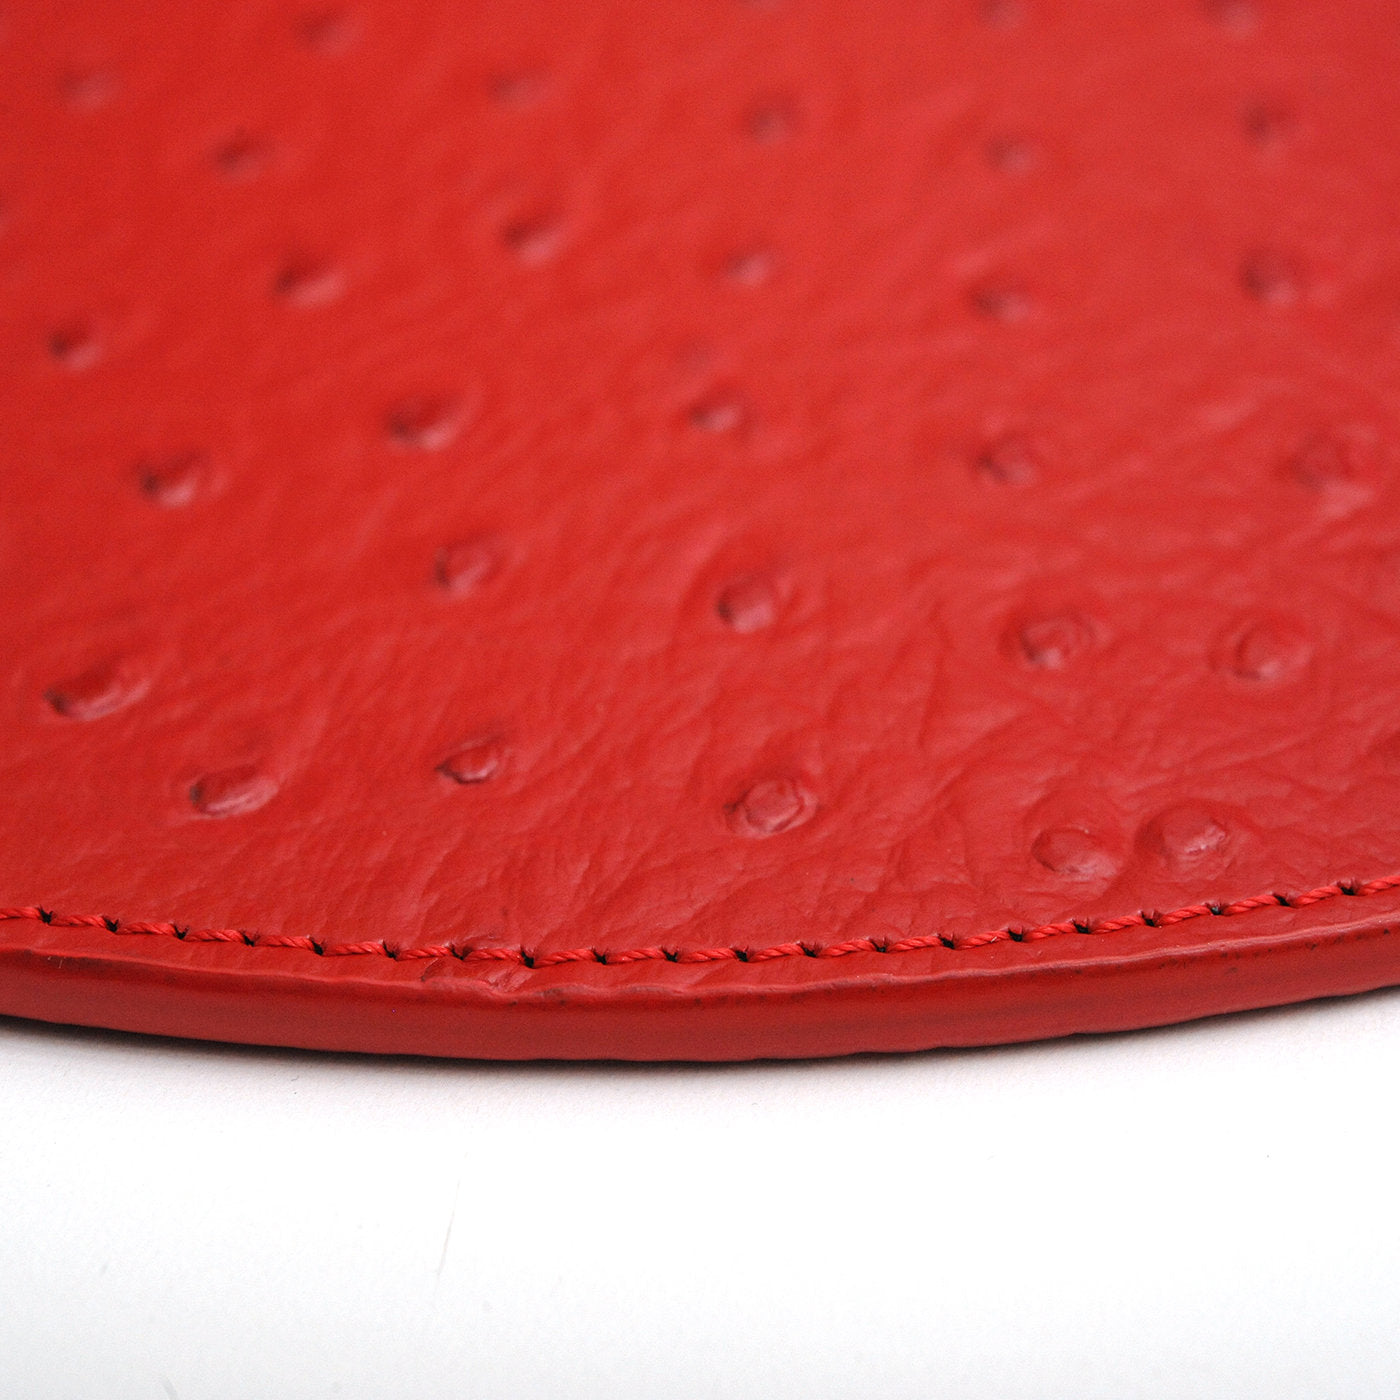 Kenya Small Set of 2 Round Red Leather Placemats - Alternative view 3